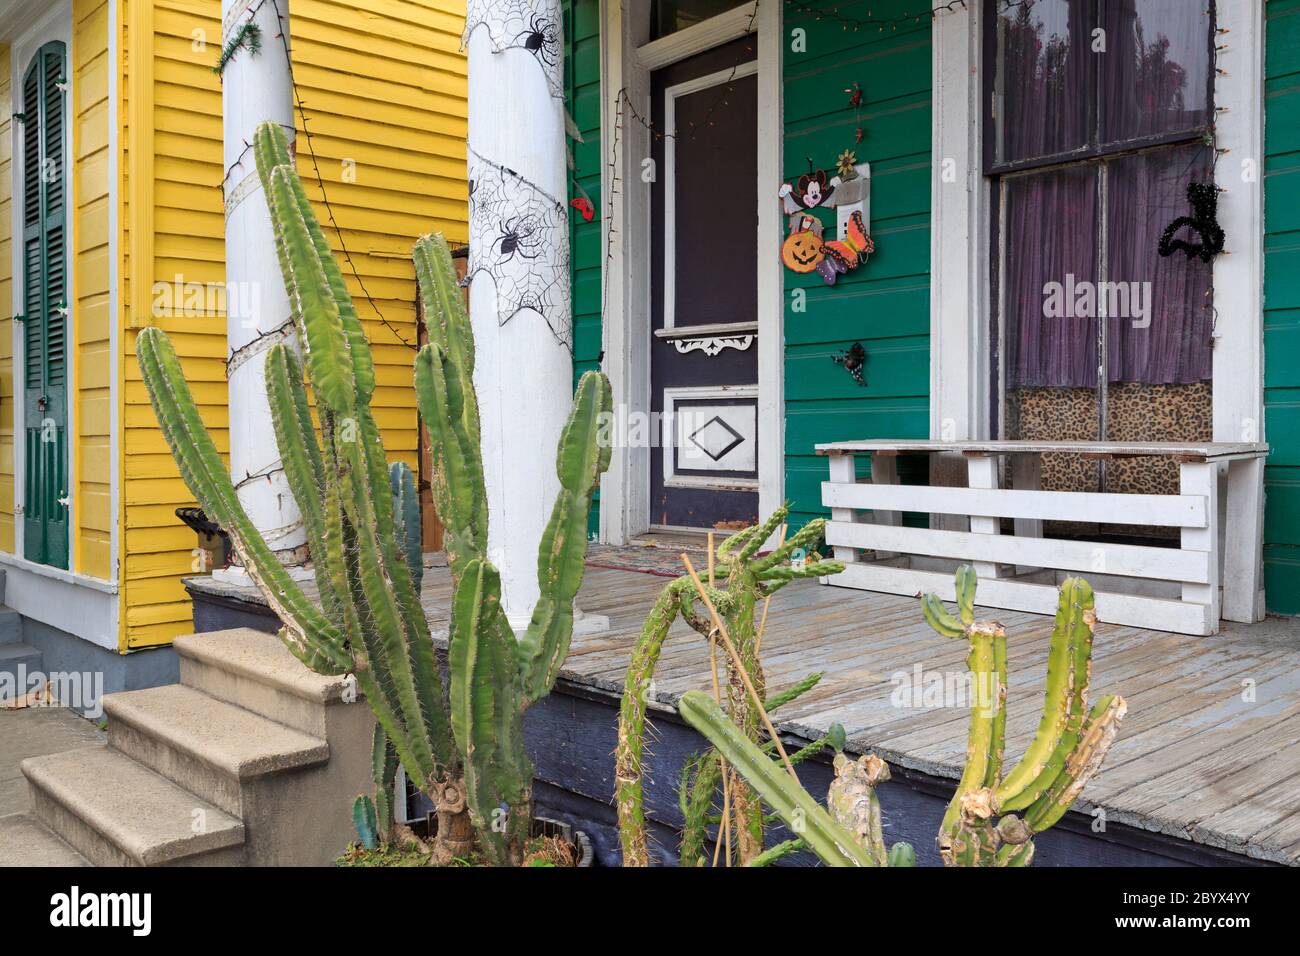 House in Faubourg Marigny District,New Orleans, Louisiana, USA Stock Photo